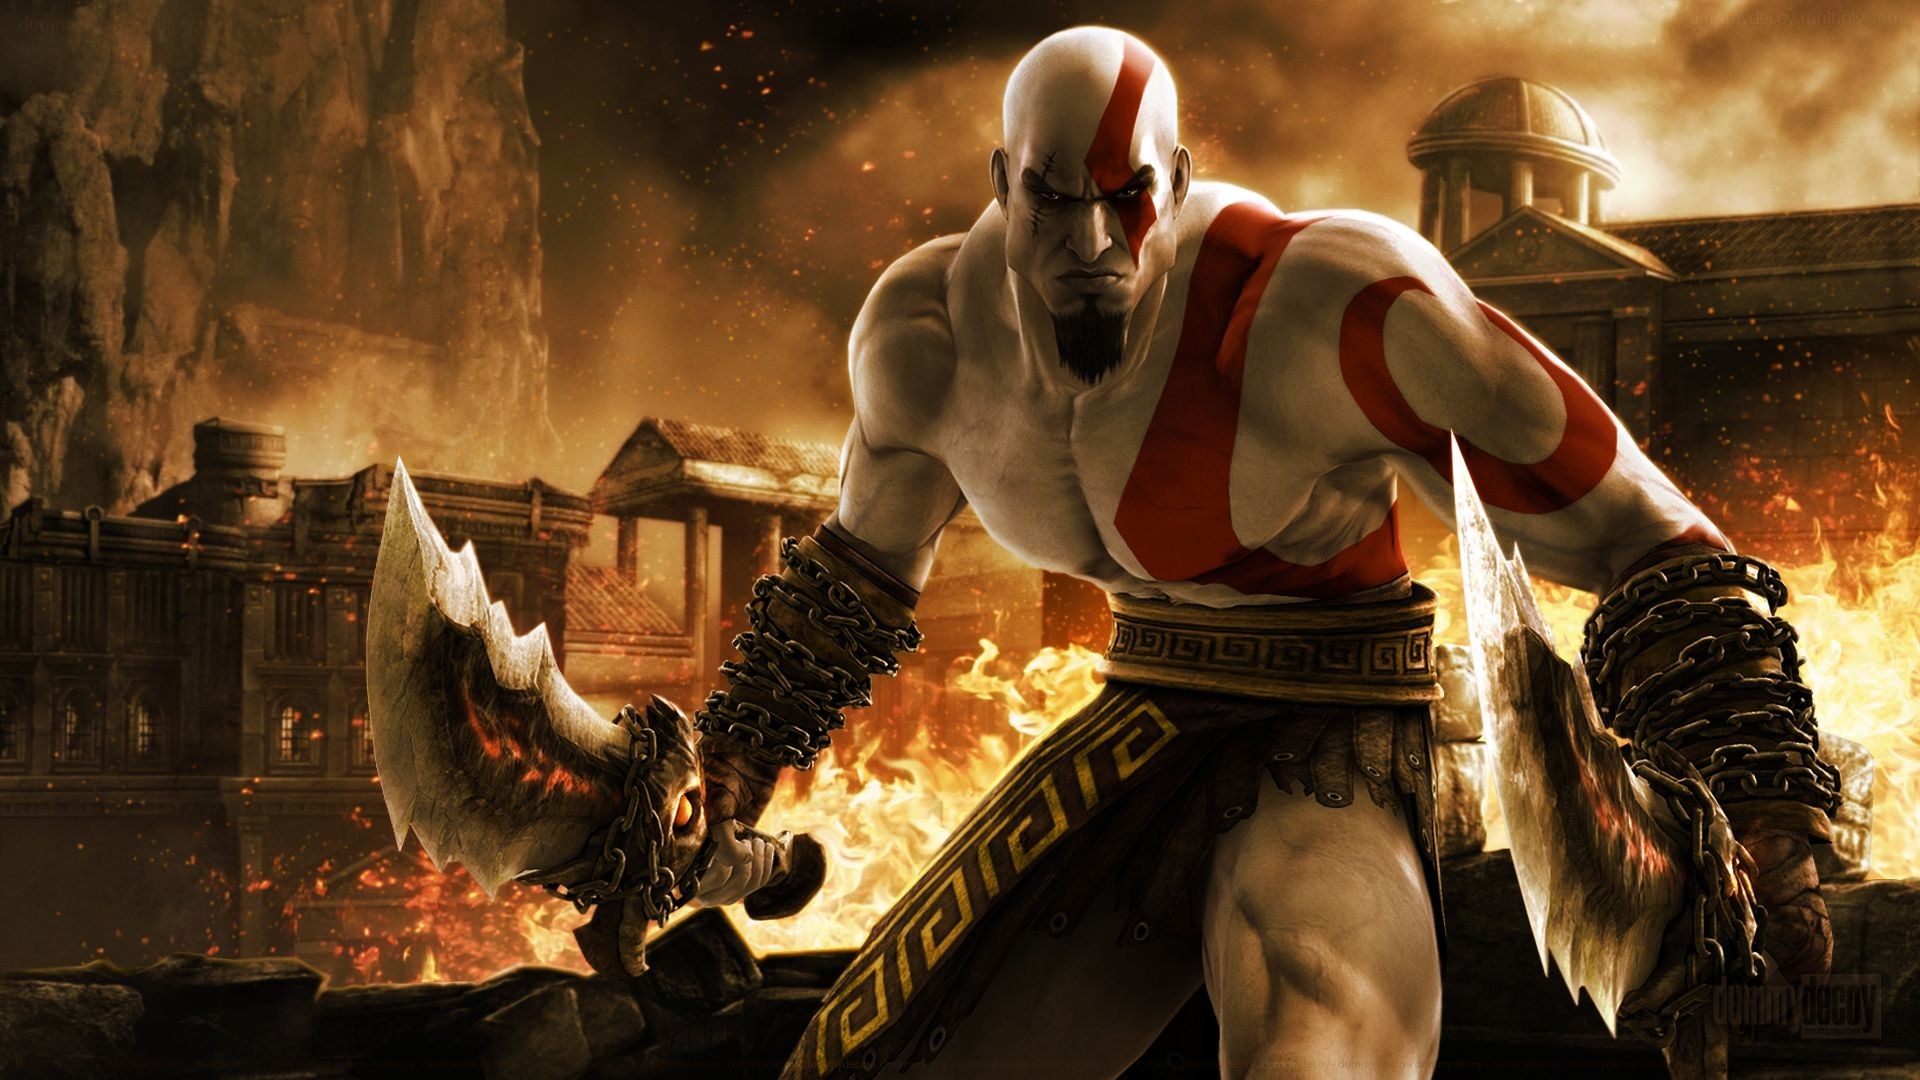 1920x1080 Wallpapers Tagged With KRATOS